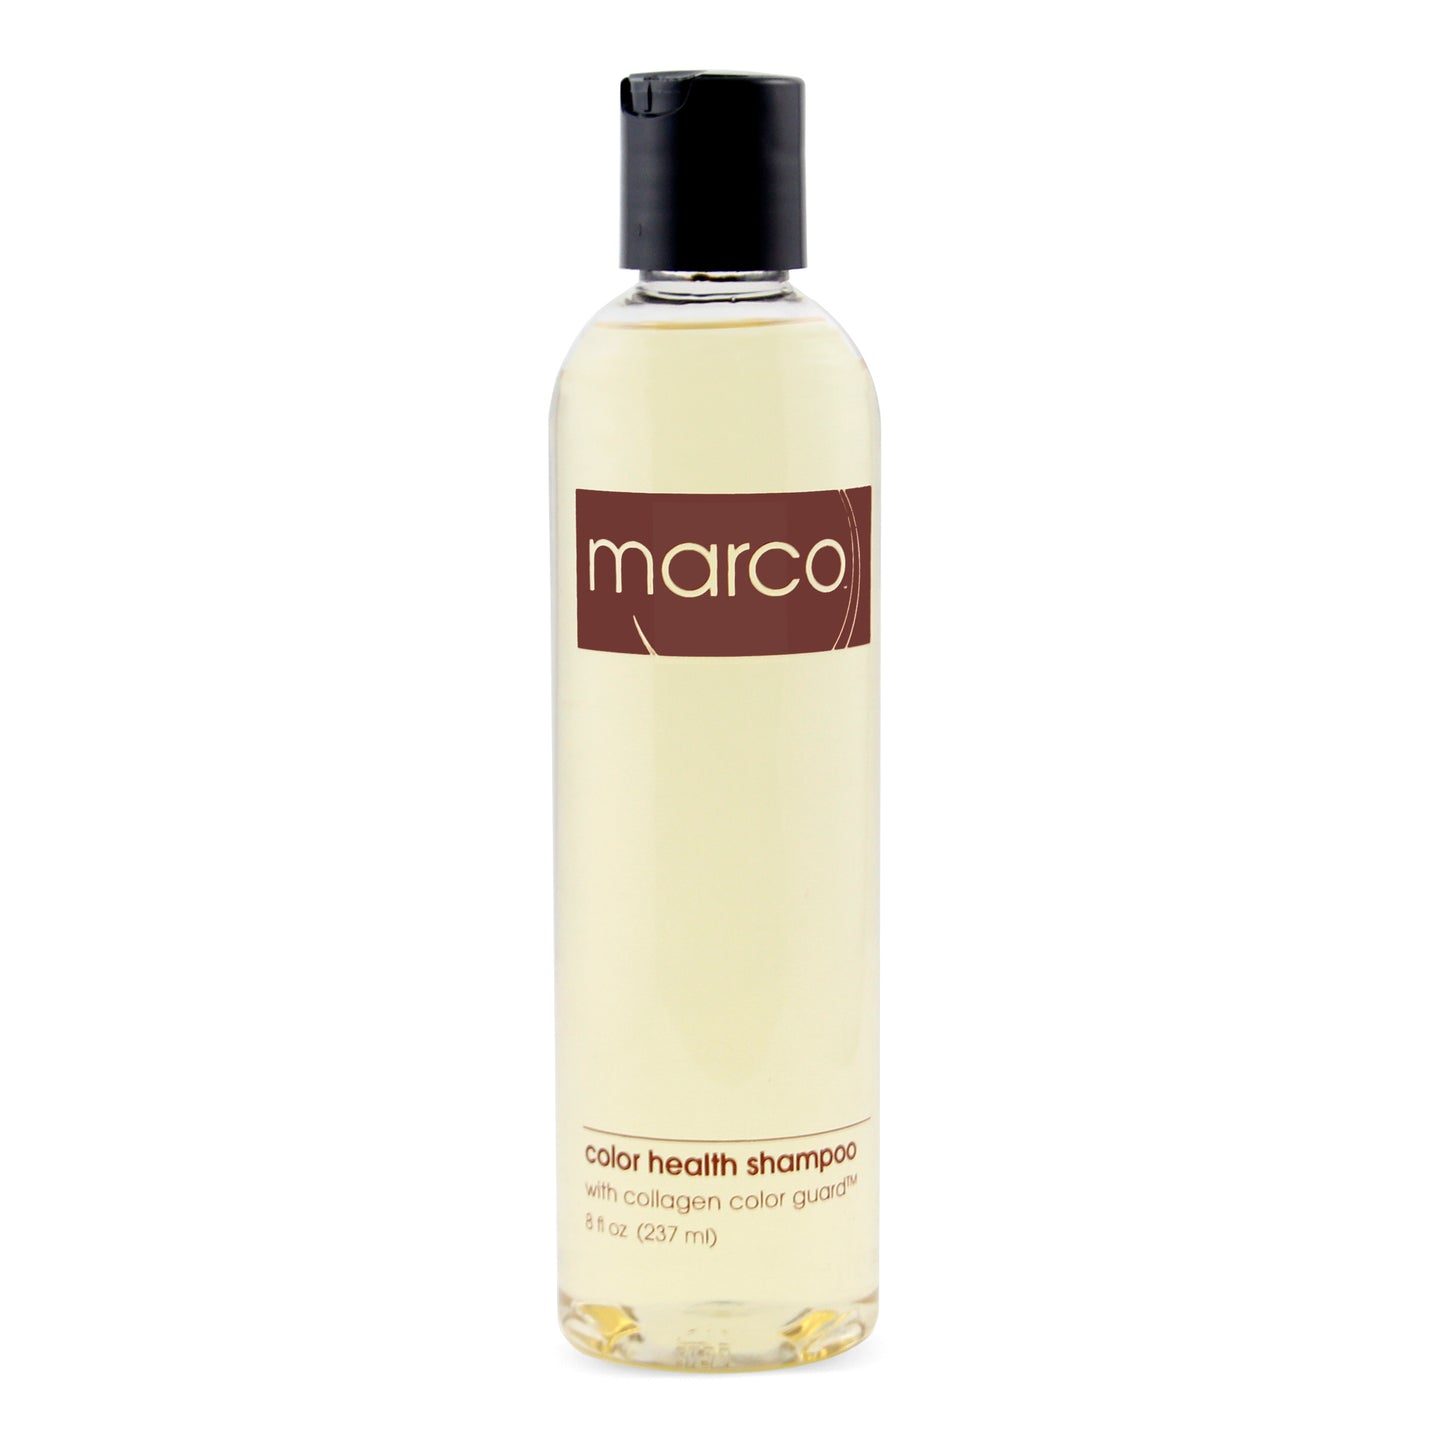 marco® color health shampoo with collagen color guard®